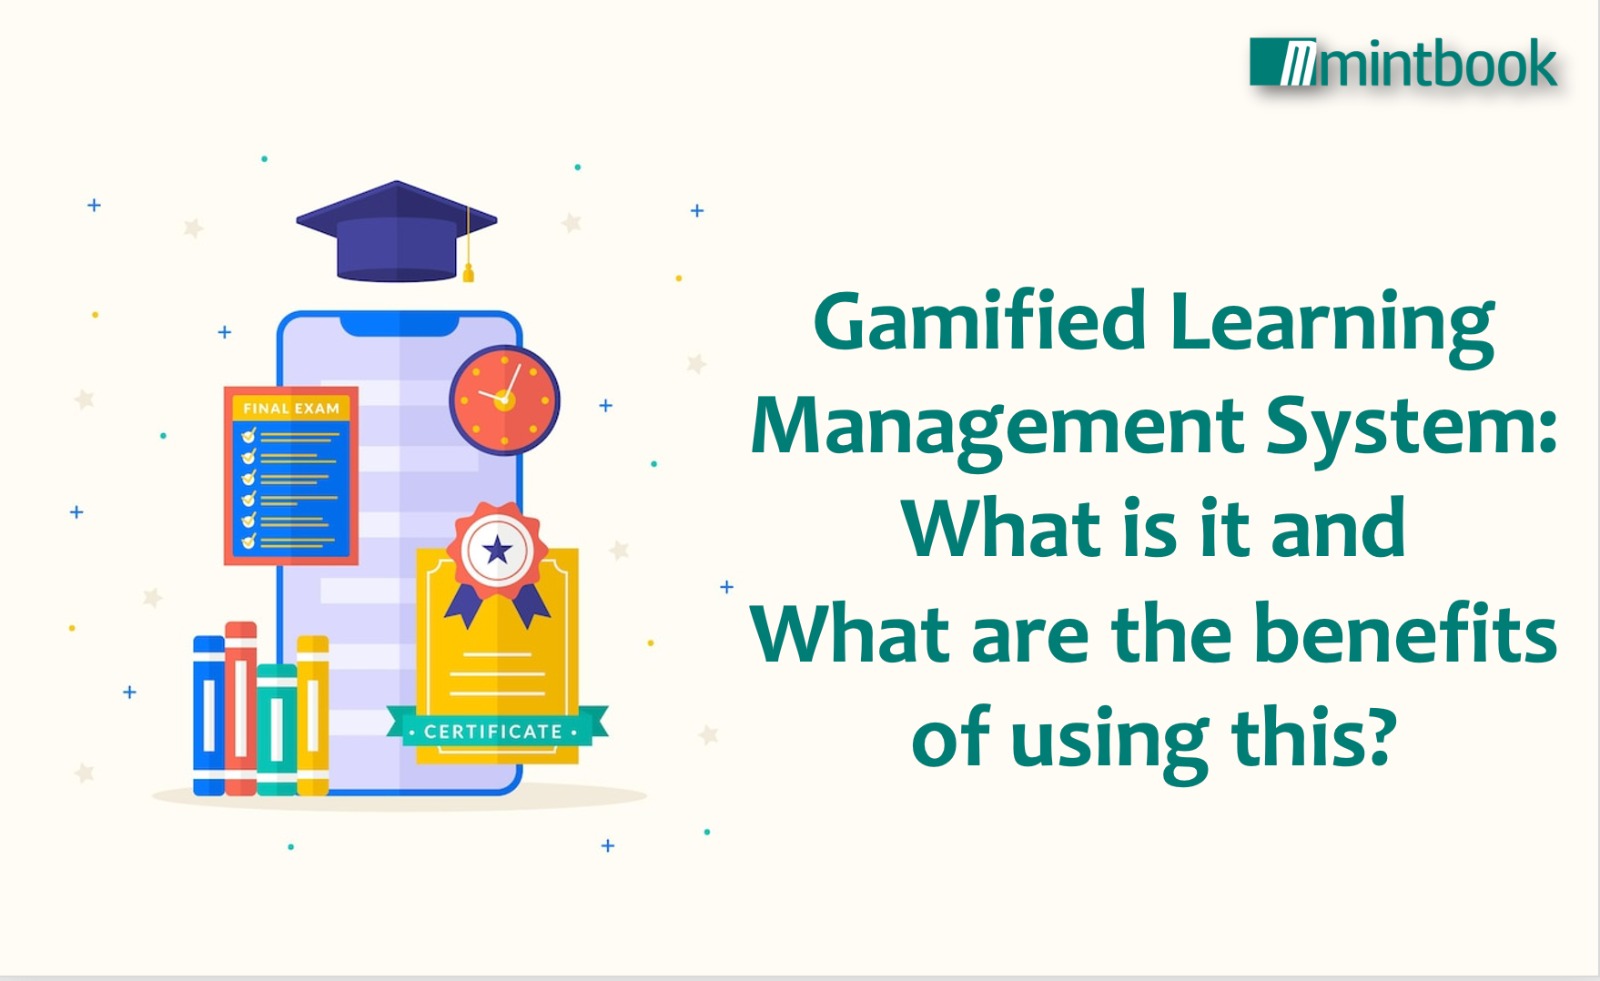 Gamified Learning Management System